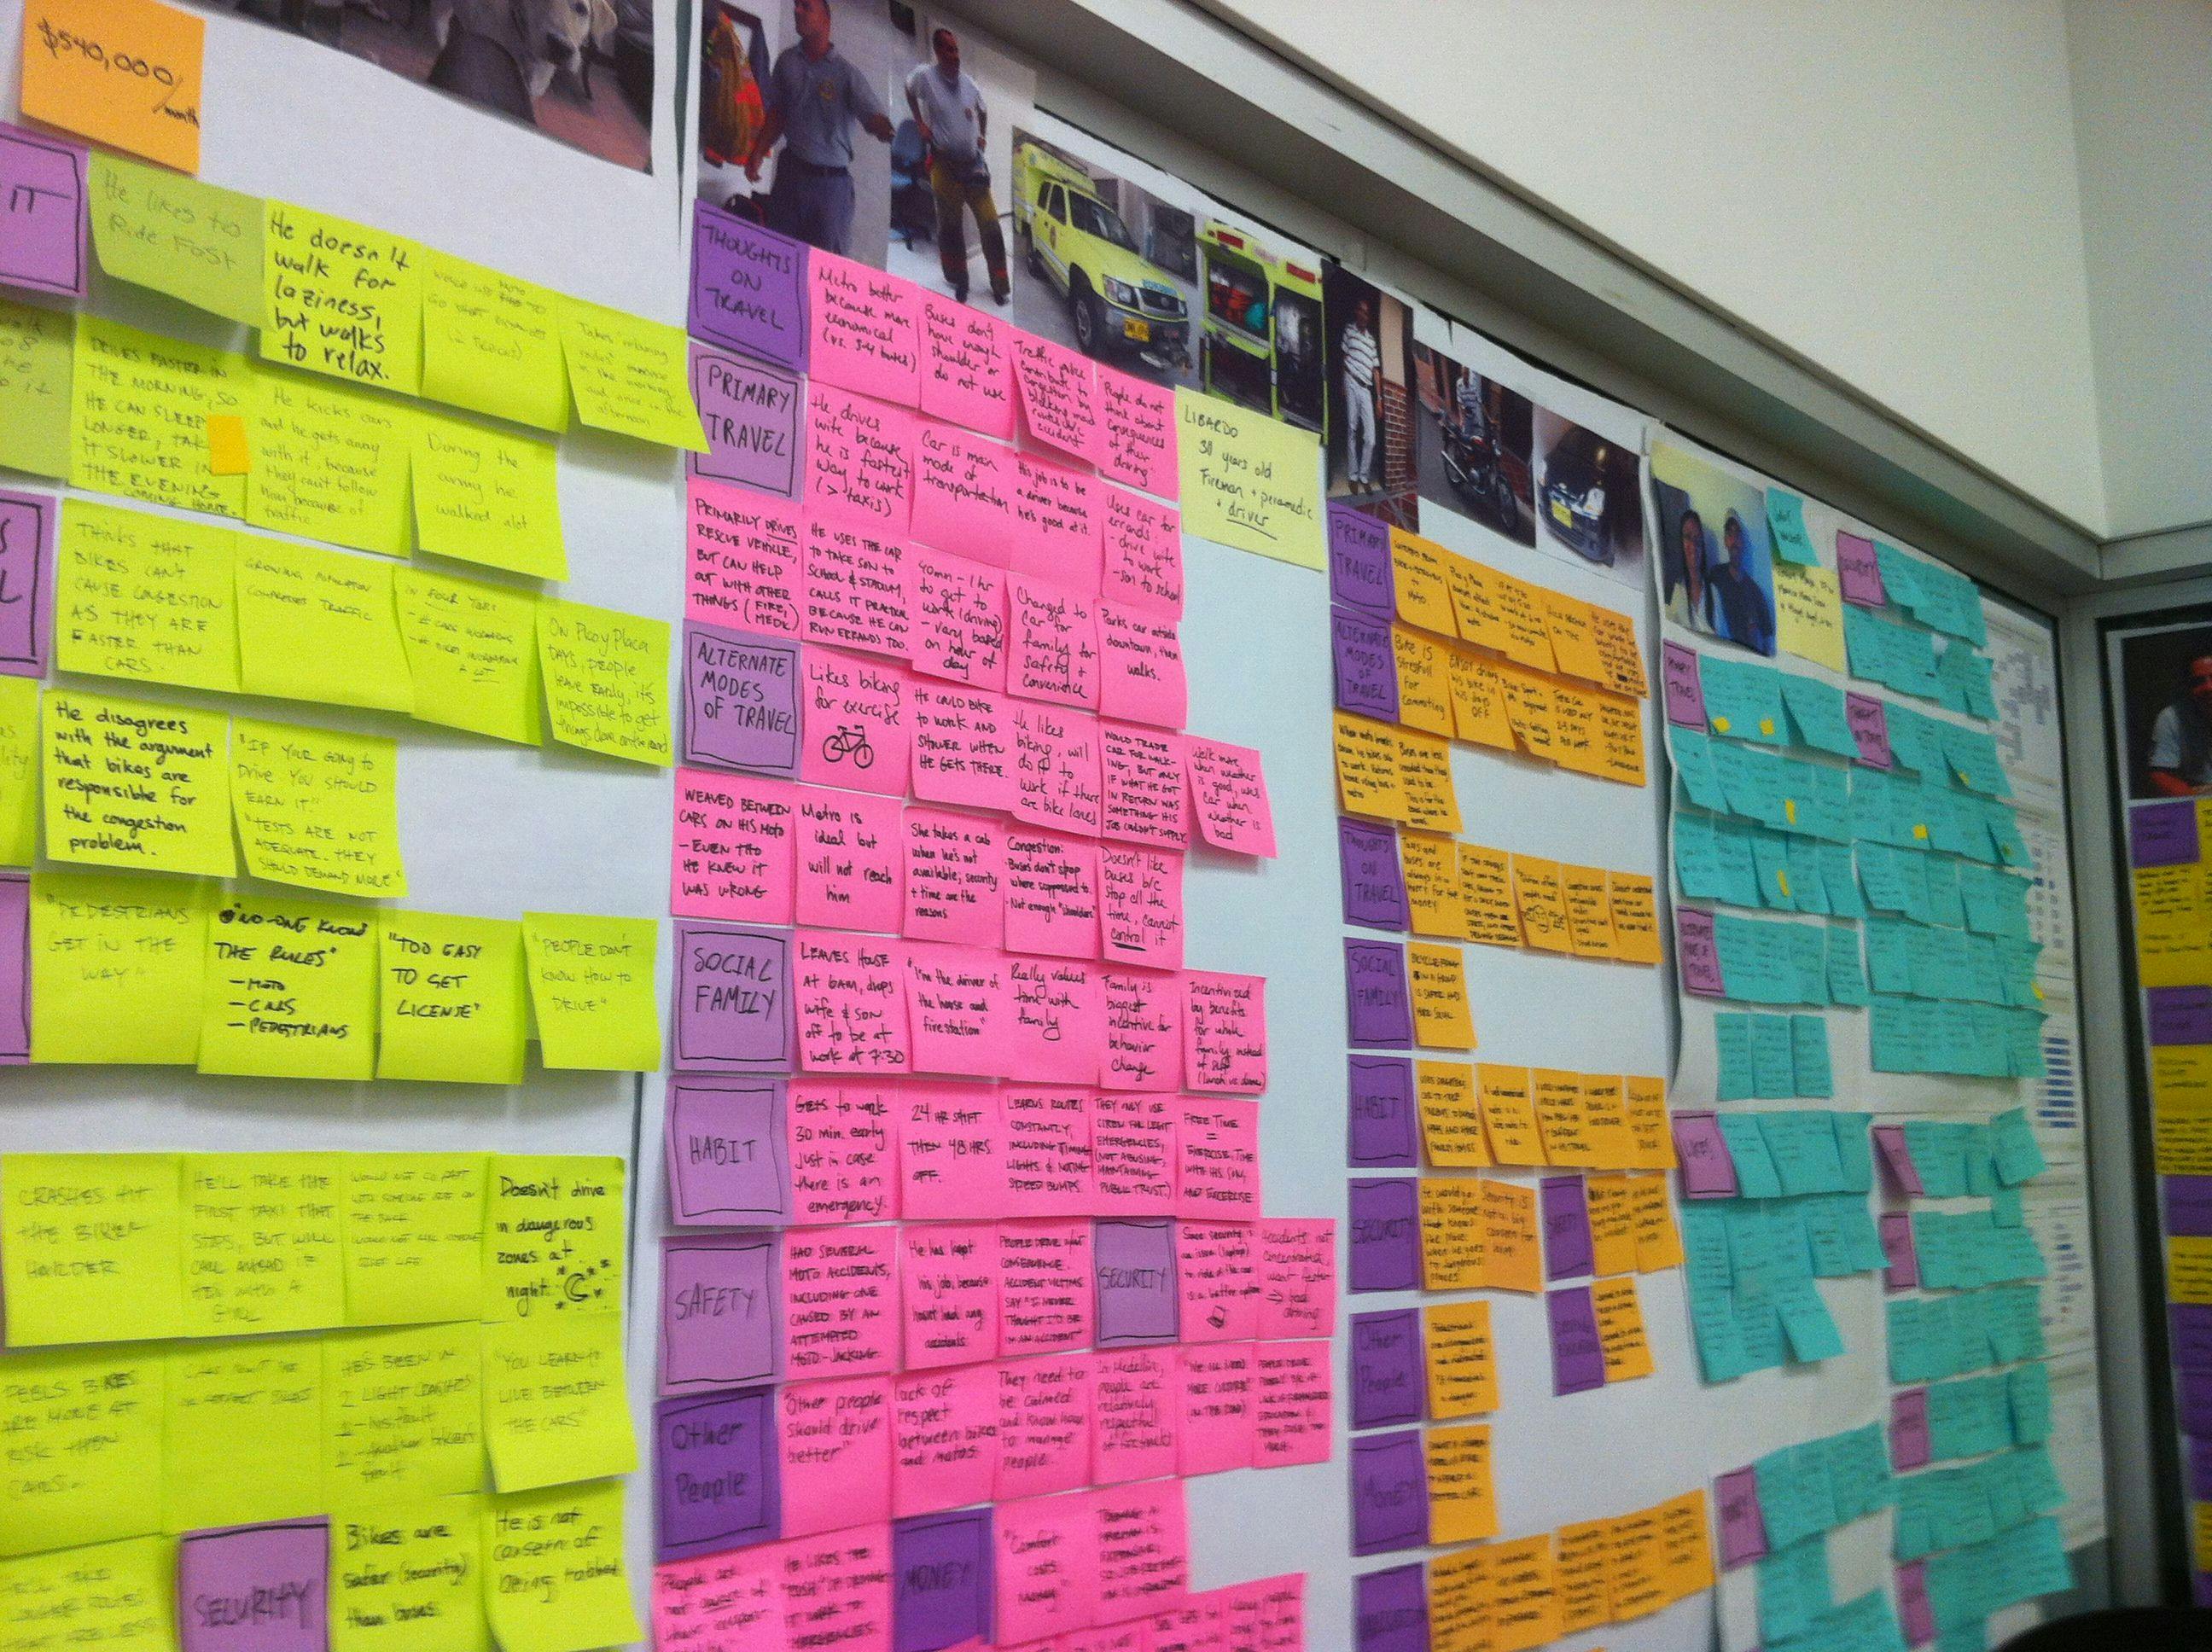 Ideation board